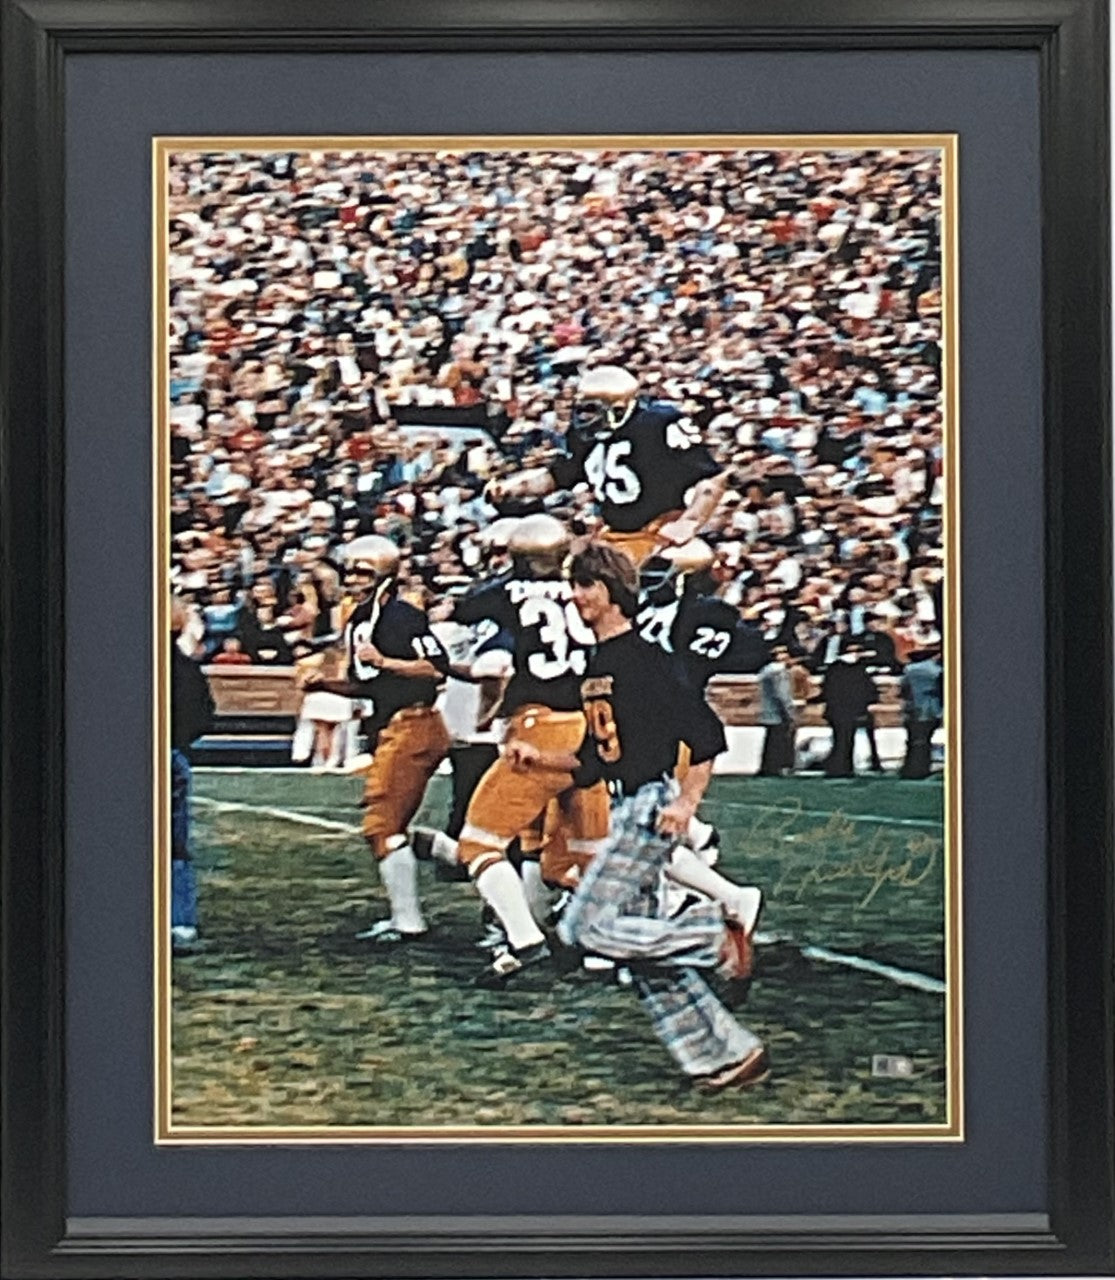 Rudy Ruettiger Notre Dame Autographed "Close Up" Photo Framed